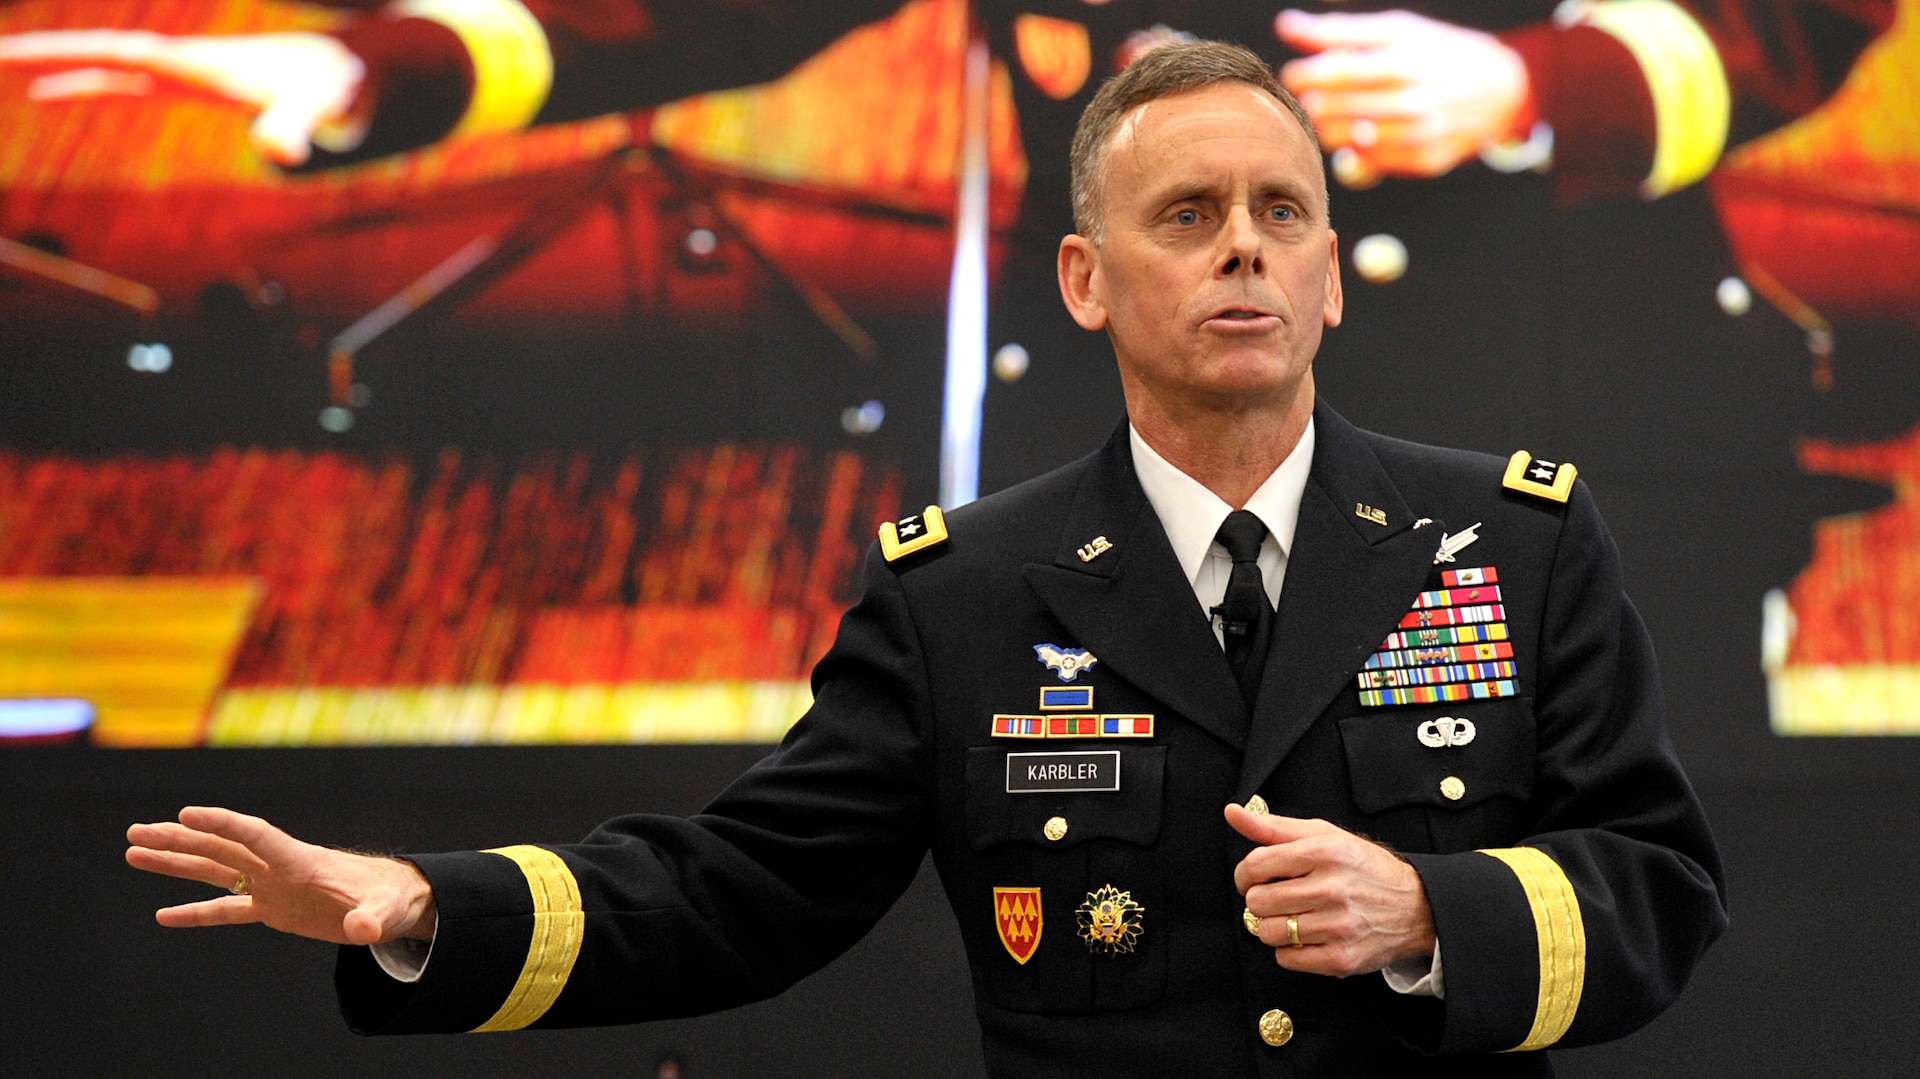 Lt. Gen. Daniel Karbler, Army Space and Missile Defense Command commander, talks about growing threats to the interests of the U.S. and its allies March 5 during an Association of the U.S. Army event in Arlington, Va.